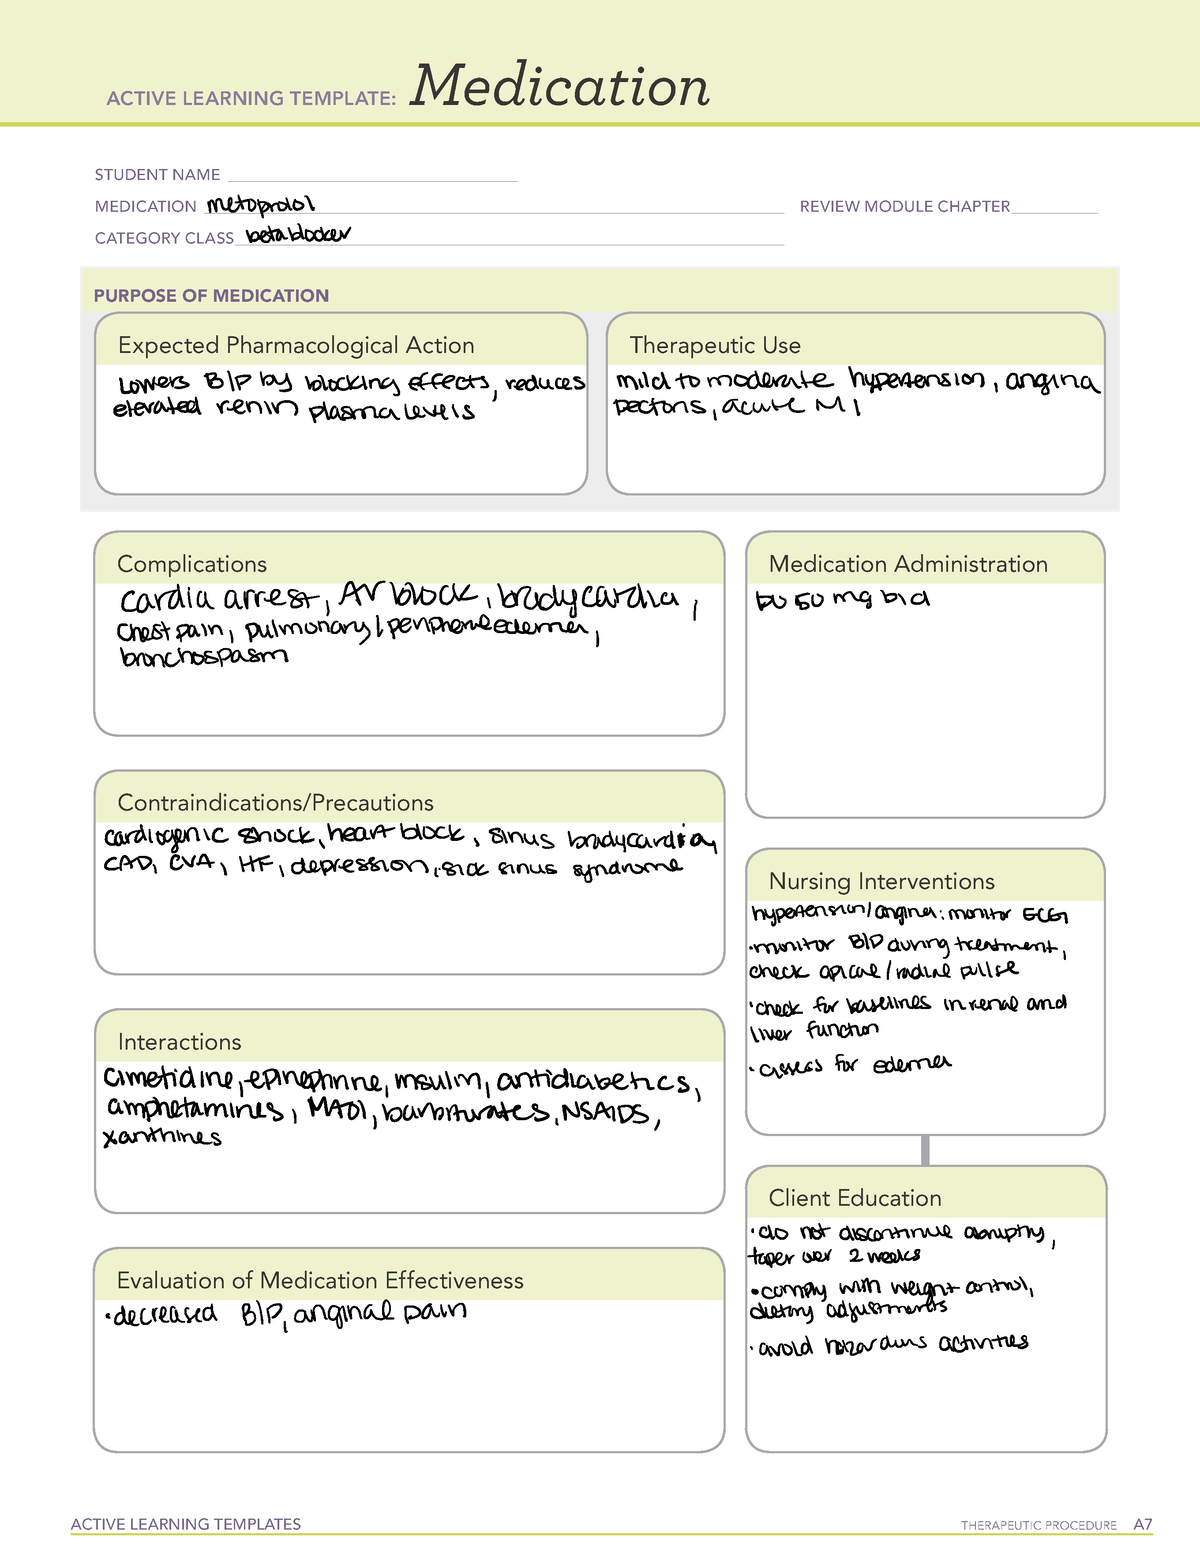 Metoprolol Medication template ACTIVE LEARNING TEMPLATES